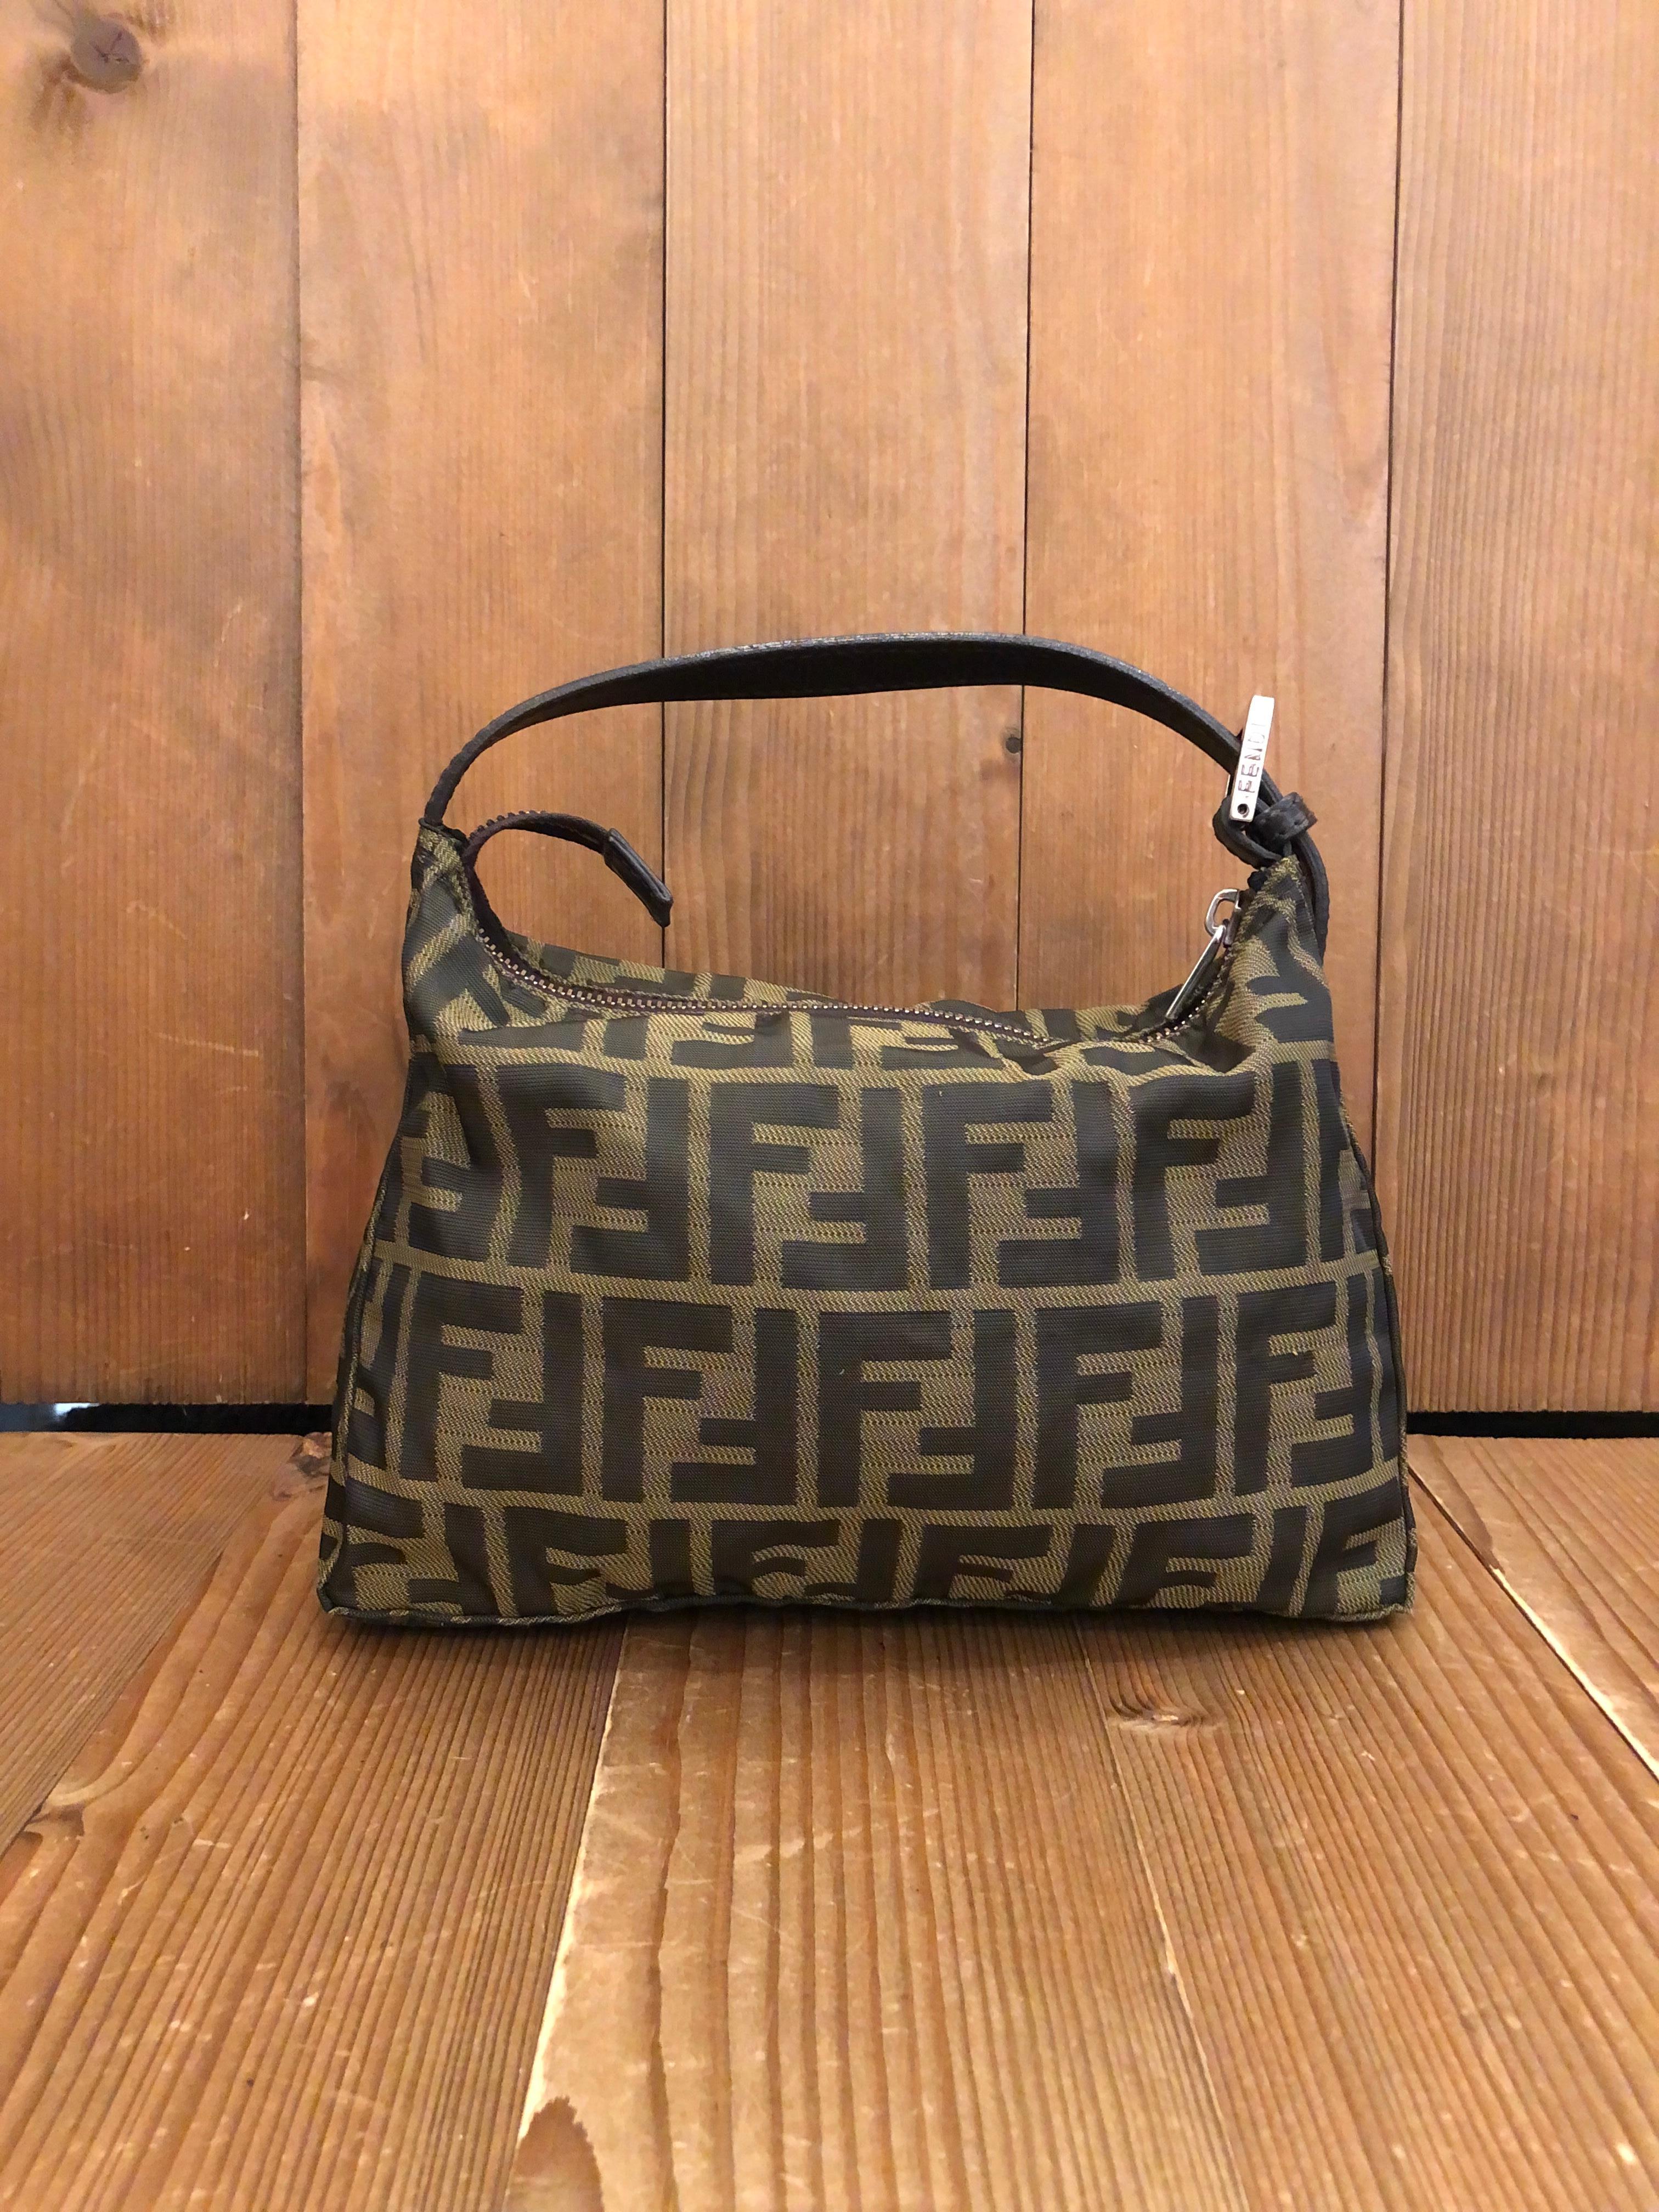 This vintage Fendi pouch handbag is crafted of Fendi's iconic brown Zucca jacquard featuring silver-toned hardware. Top zipper closure opens to an unlined interior. Made in Italy. Measures 9.5 x 6.5 x 4 inches Drop 4 inches. Compact in size but big